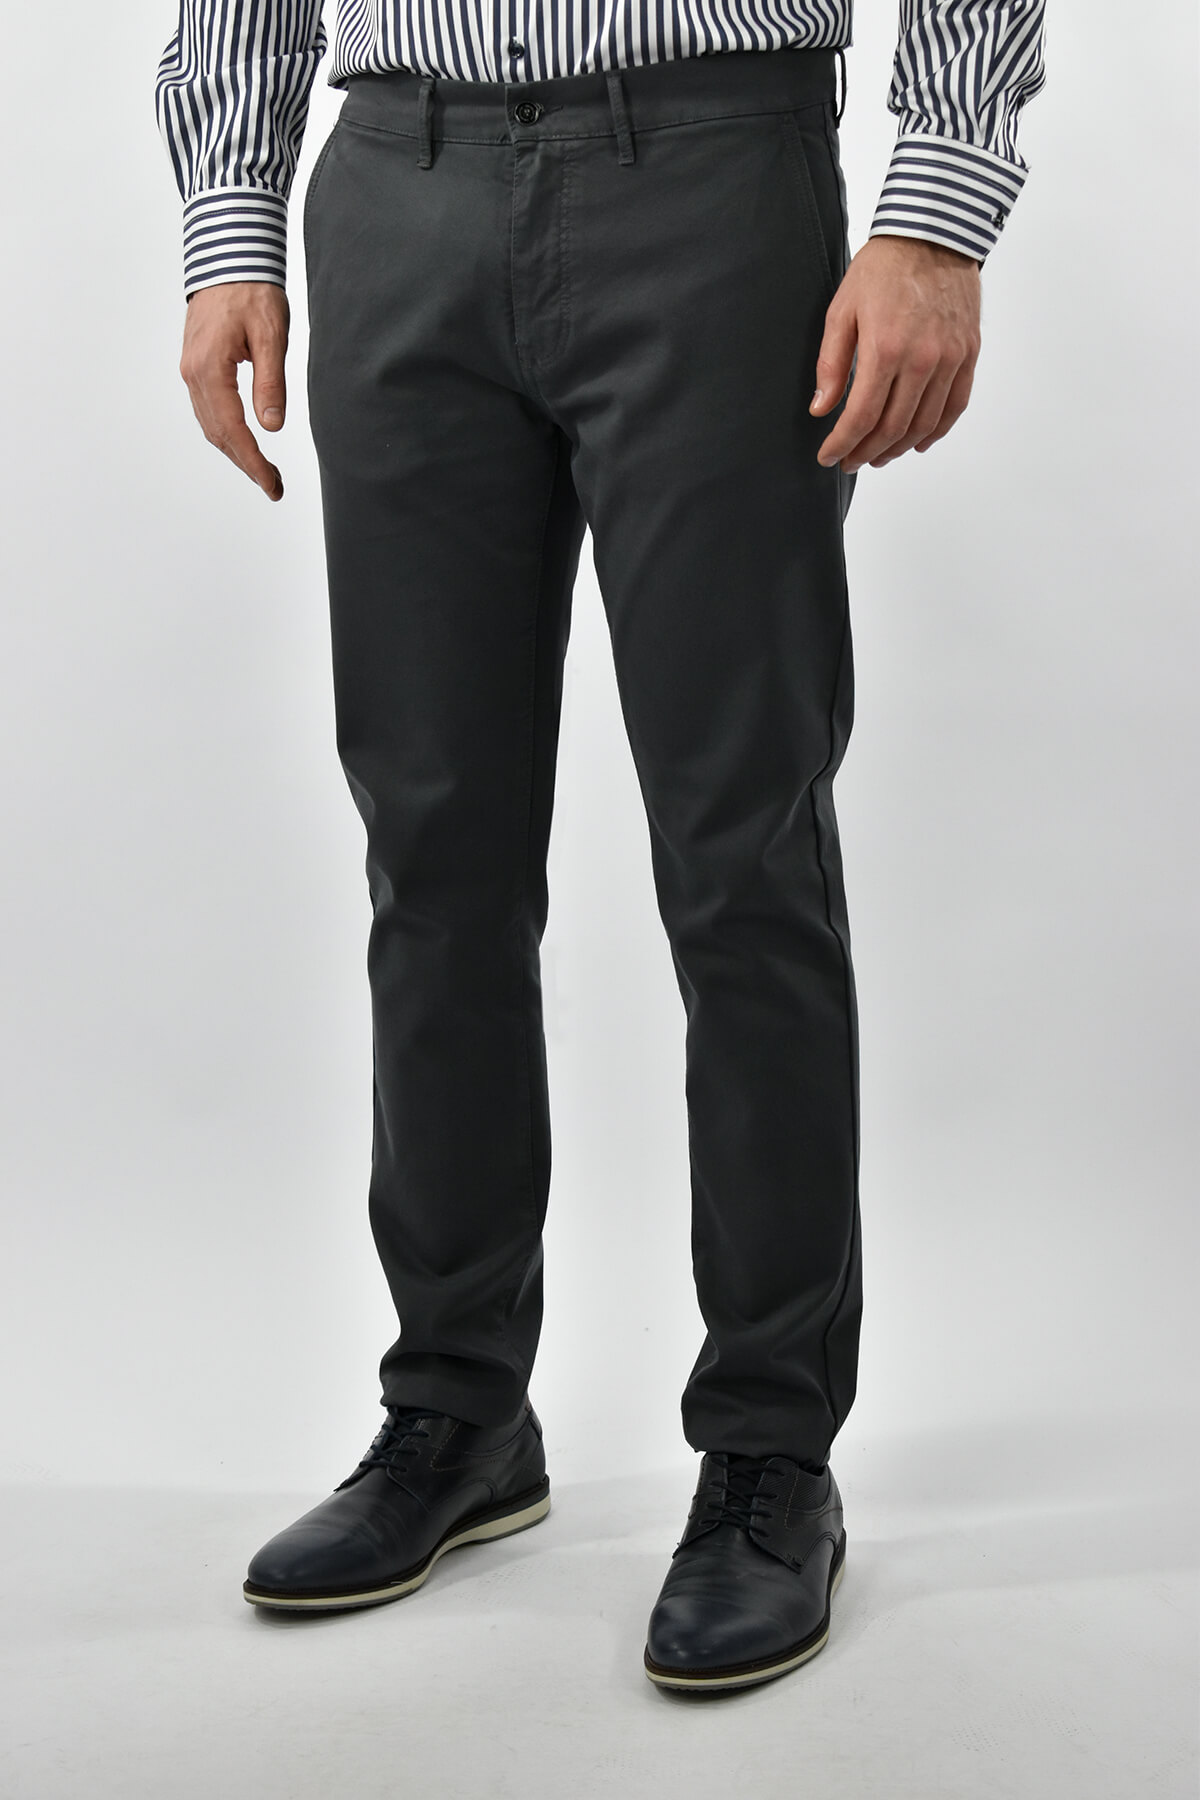 Lcdn Trousers Chinos Abery Skinny